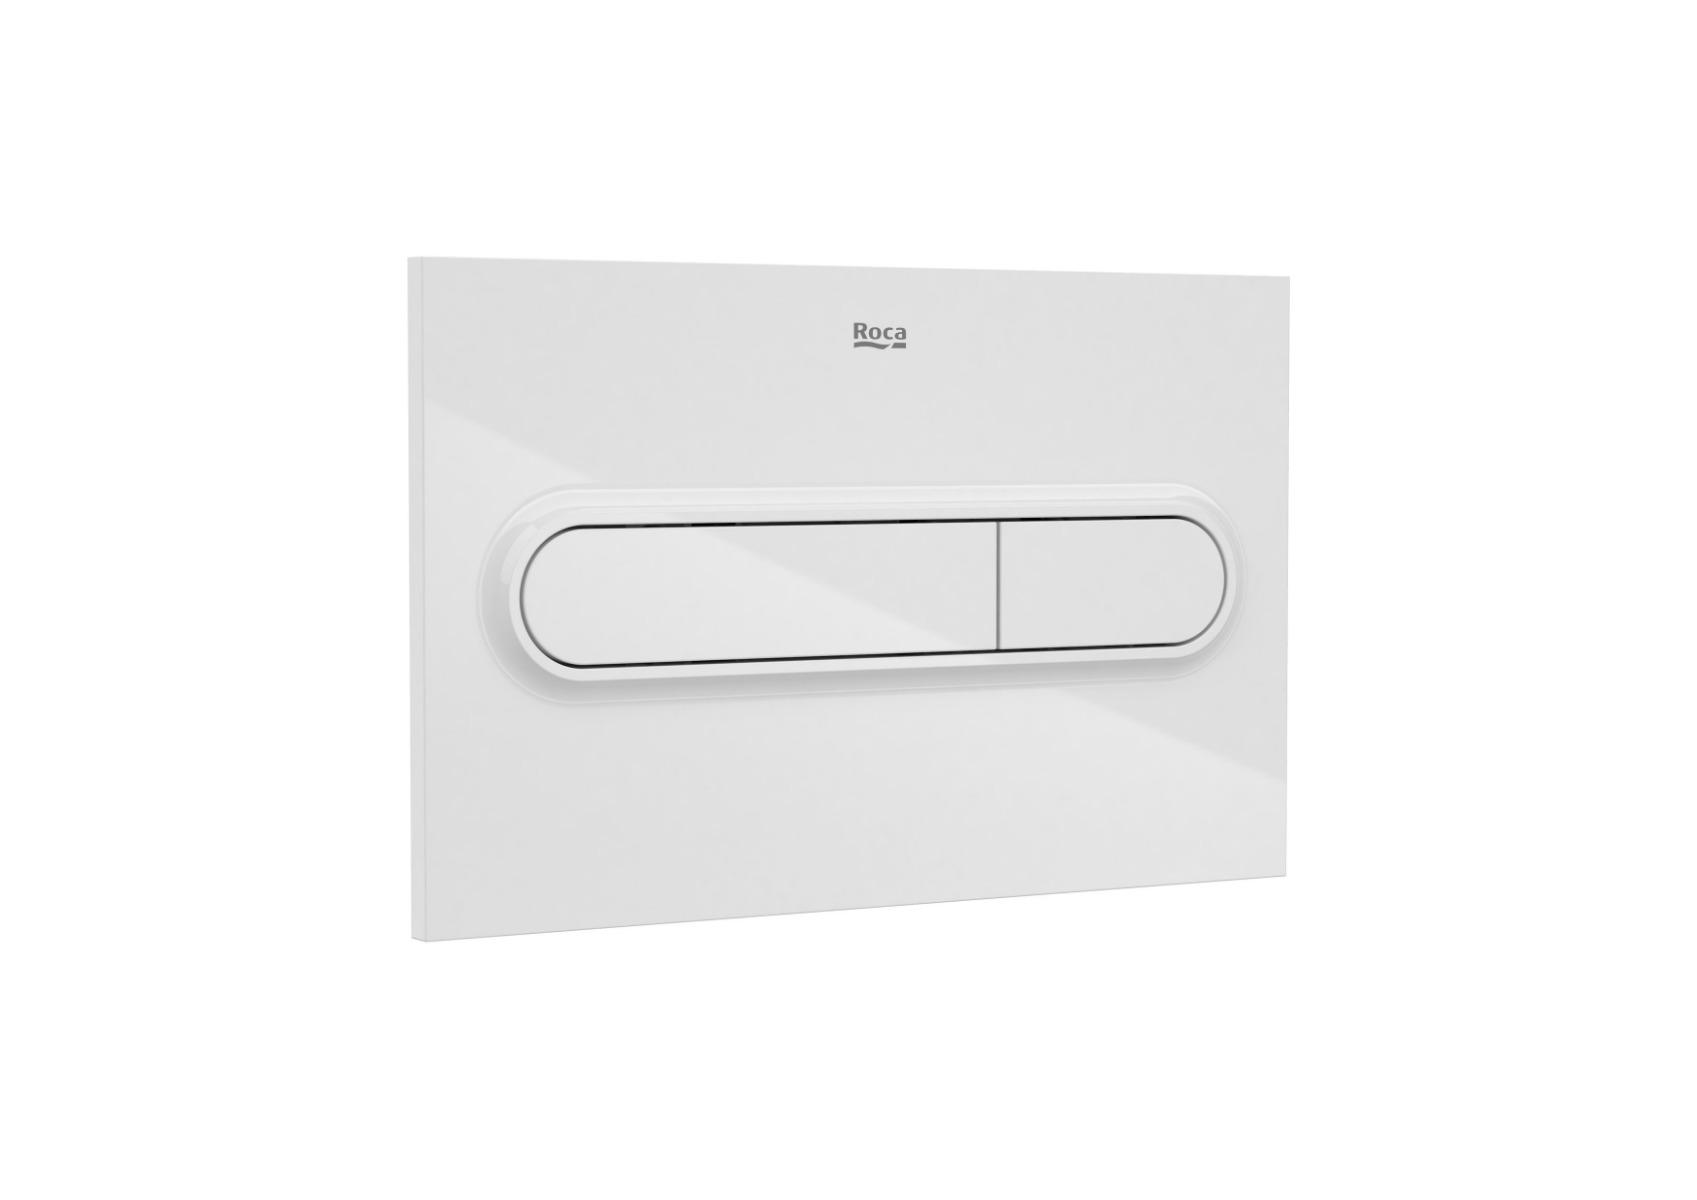 PL1 DUAL - Dual flush operating plate for concealed cistern